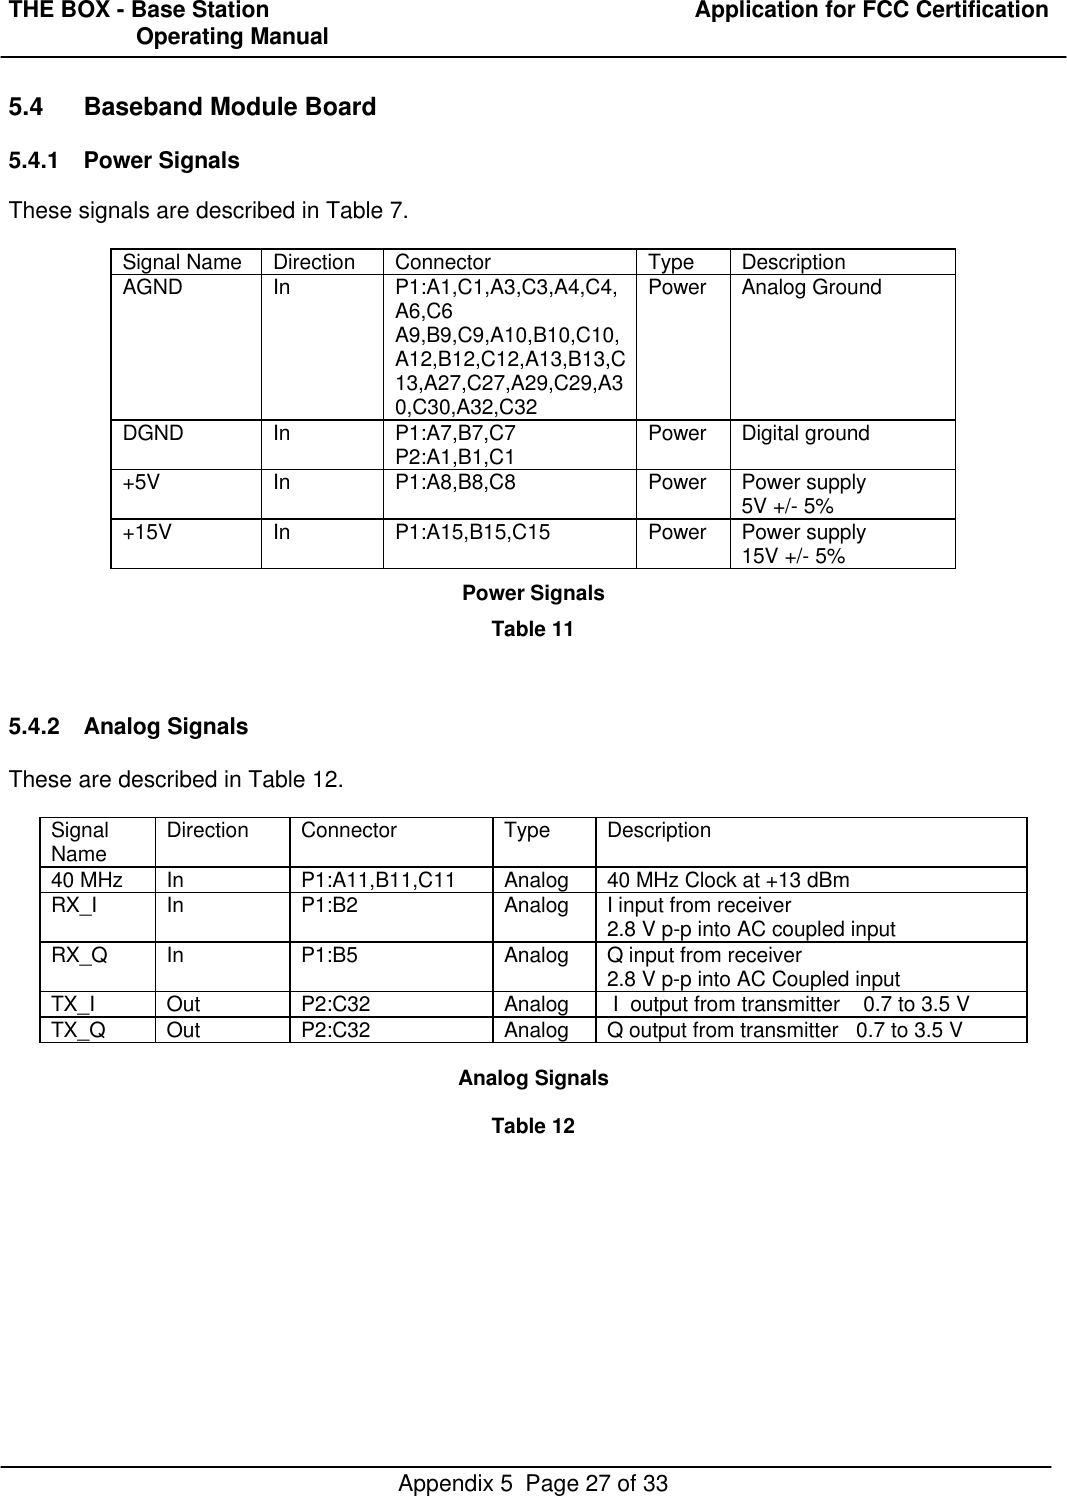 THE BOX - Base Station  Application for FCC Certification                    Operating ManualAppendix 5  Page 27 of 335.4 Baseband Module Board5.4.1 Power SignalsThese signals are described in Table 7.Signal Name Direction Connector Type DescriptionAGND In P1:A1,C1,A3,C3,A4,C4,A6,C6A9,B9,C9,A10,B10,C10,A12,B12,C12,A13,B13,C13,A27,C27,A29,C29,A30,C30,A32,C32Power Analog GroundDGND In P1:A7,B7,C7P2:A1,B1,C1 Power Digital ground+5V In P1:A8,B8,C8 Power Power supply5V +/- 5%+15V In P1:A15,B15,C15 Power Power supply15V +/- 5%Power SignalsTable 115.4.2 Analog SignalsThese are described in Table 12.SignalName Direction Connector Type Description40 MHz In P1:A11,B11,C11 Analog 40 MHz Clock at +13 dBmRX_I In P1:B2 Analog I input from receiver2.8 V p-p into AC coupled inputRX_Q In P1:B5 Analog Q input from receiver2.8 V p-p into AC Coupled inputTX_I Out P2:C32 Analog  I  output from transmitter    0.7 to 3.5 VTX_Q Out P2:C32 Analog Q output from transmitter   0.7 to 3.5 VAnalog SignalsTable 12